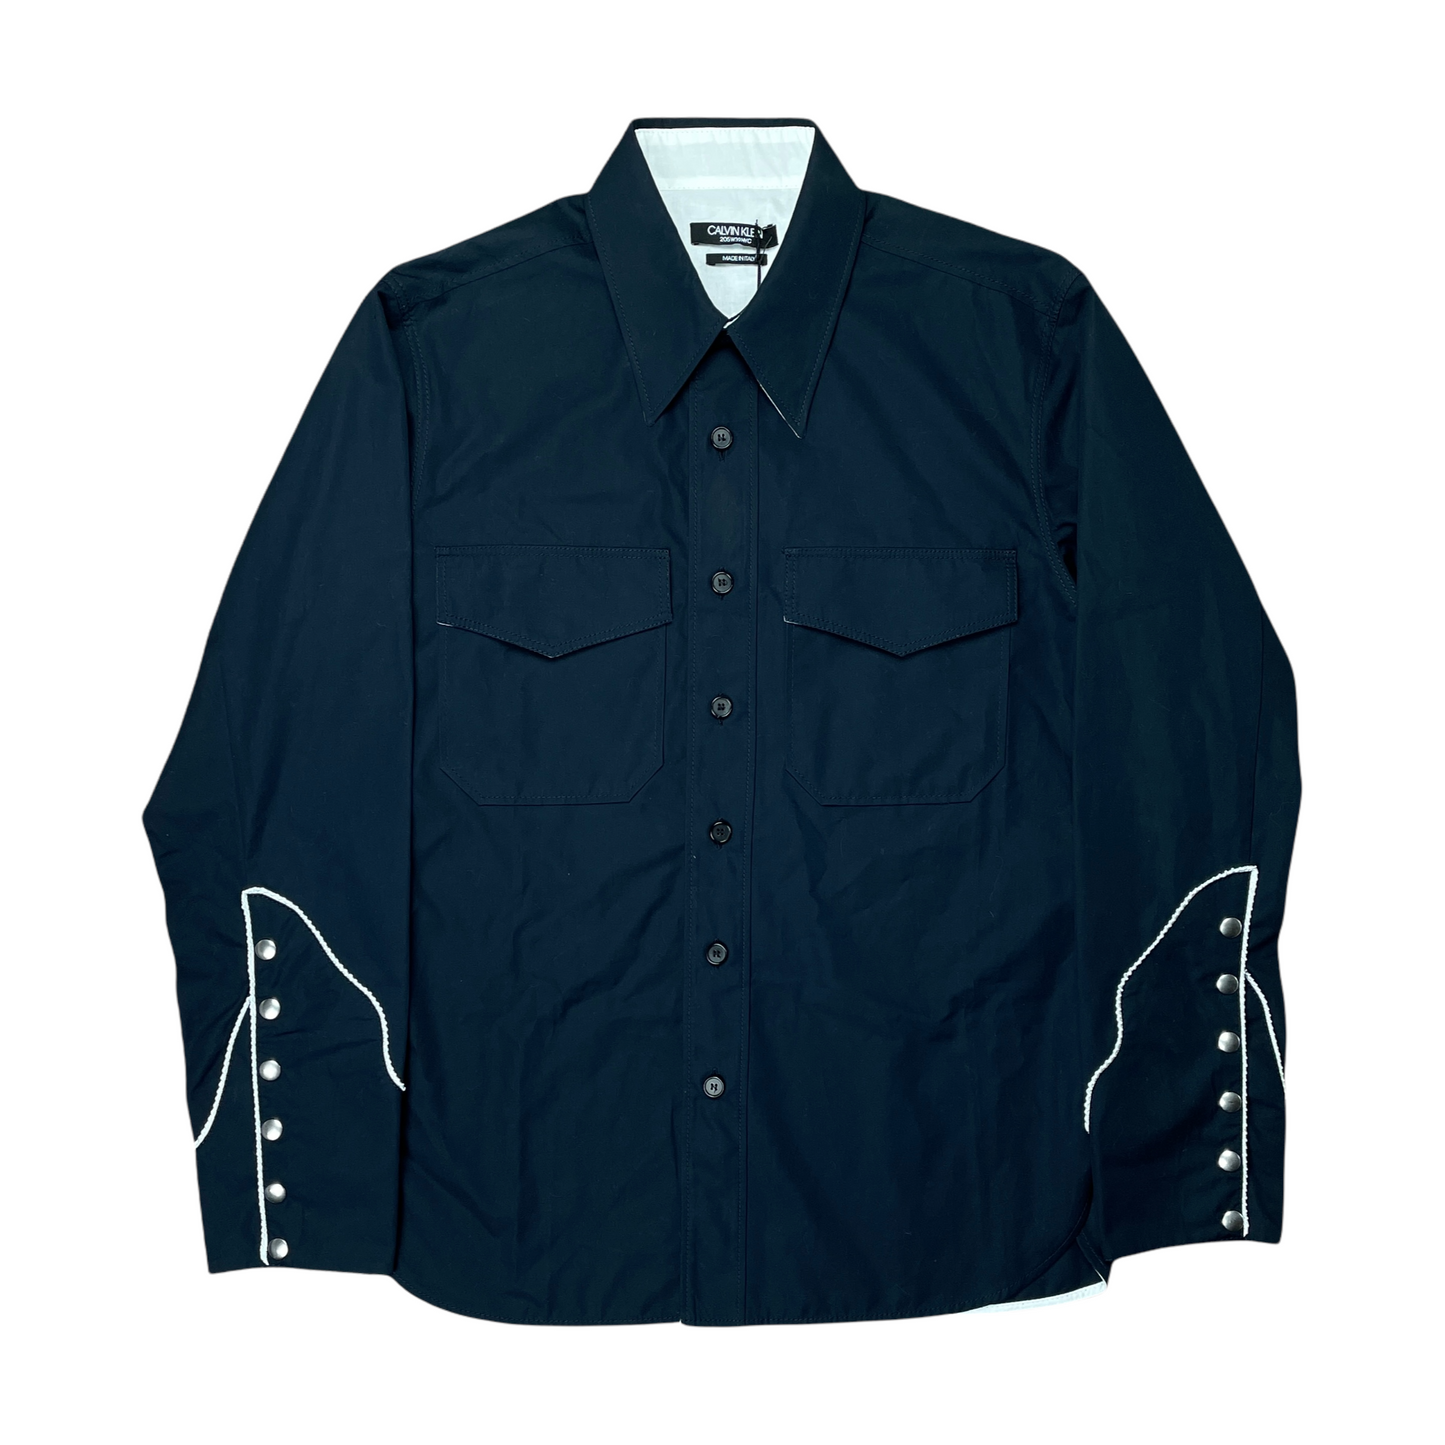 Calvin Klein 205W39NYC Contrast Trimmed Western Shirt - AW18